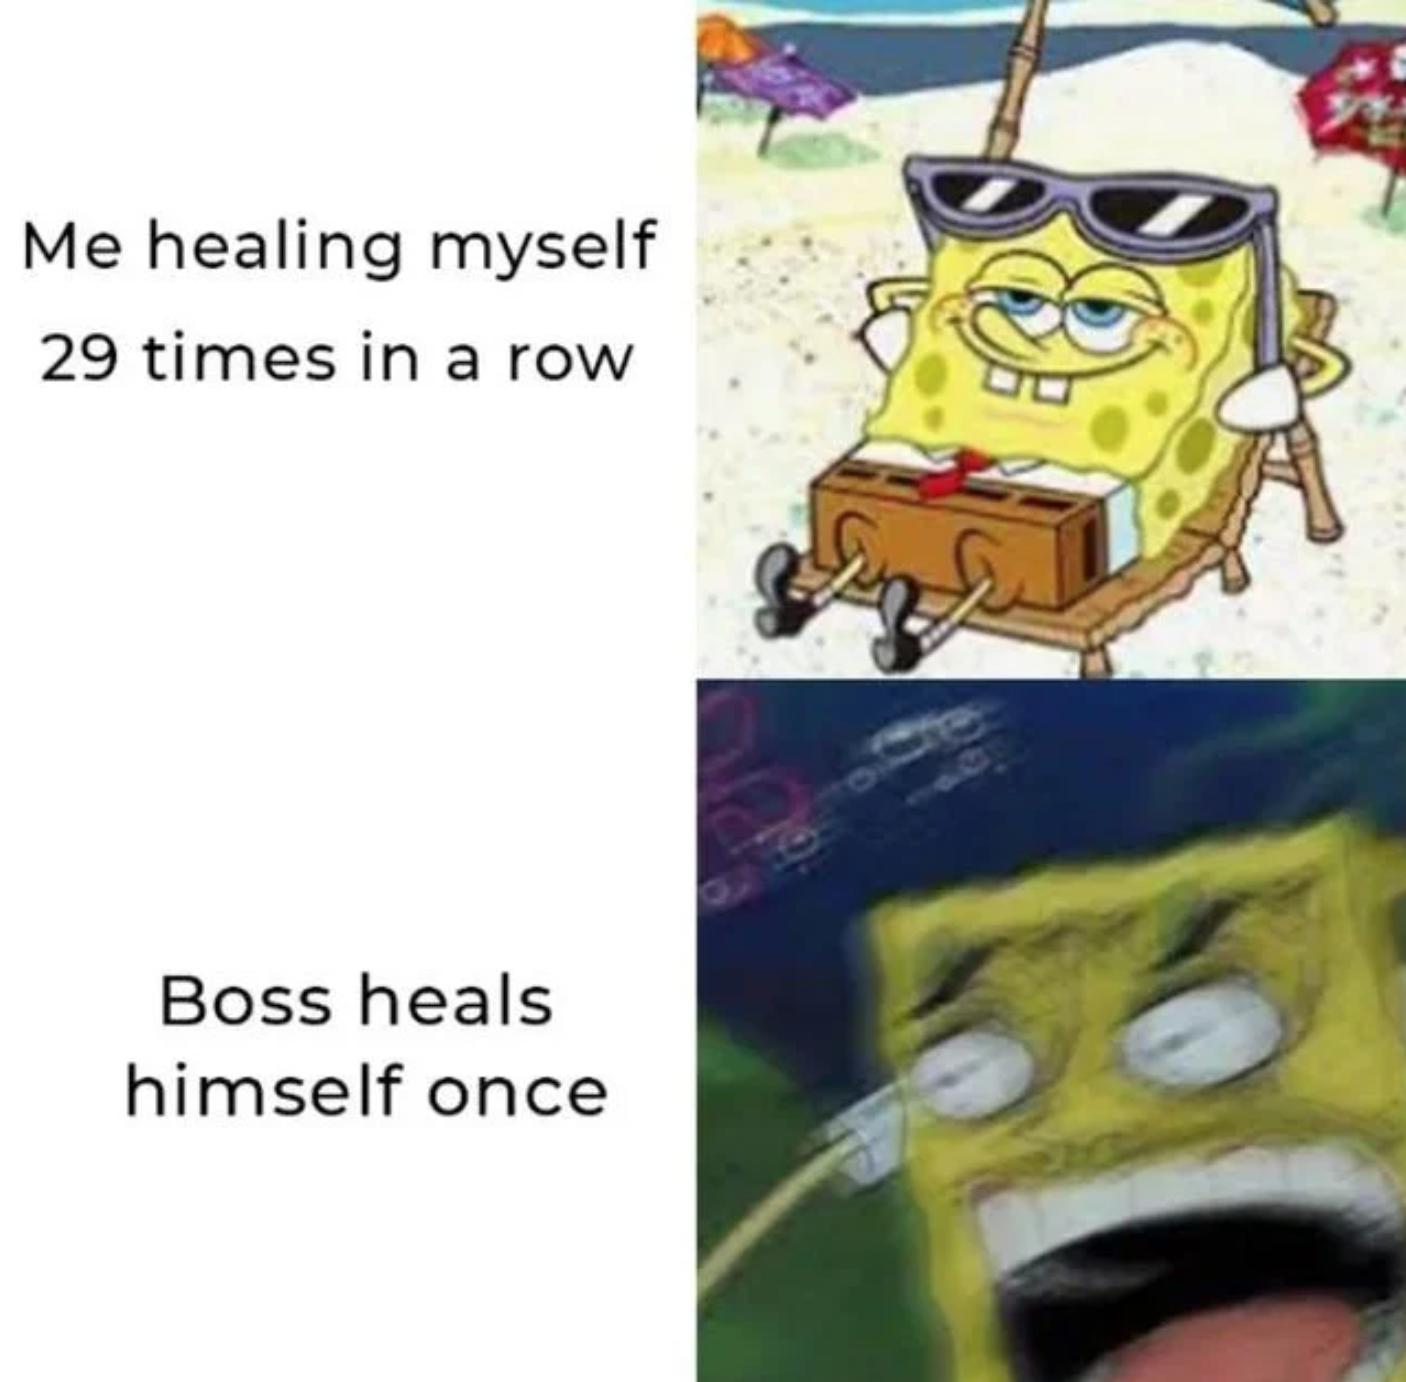 funny gaming memes - Me healing myself 29 times in a row Boss heals himself once